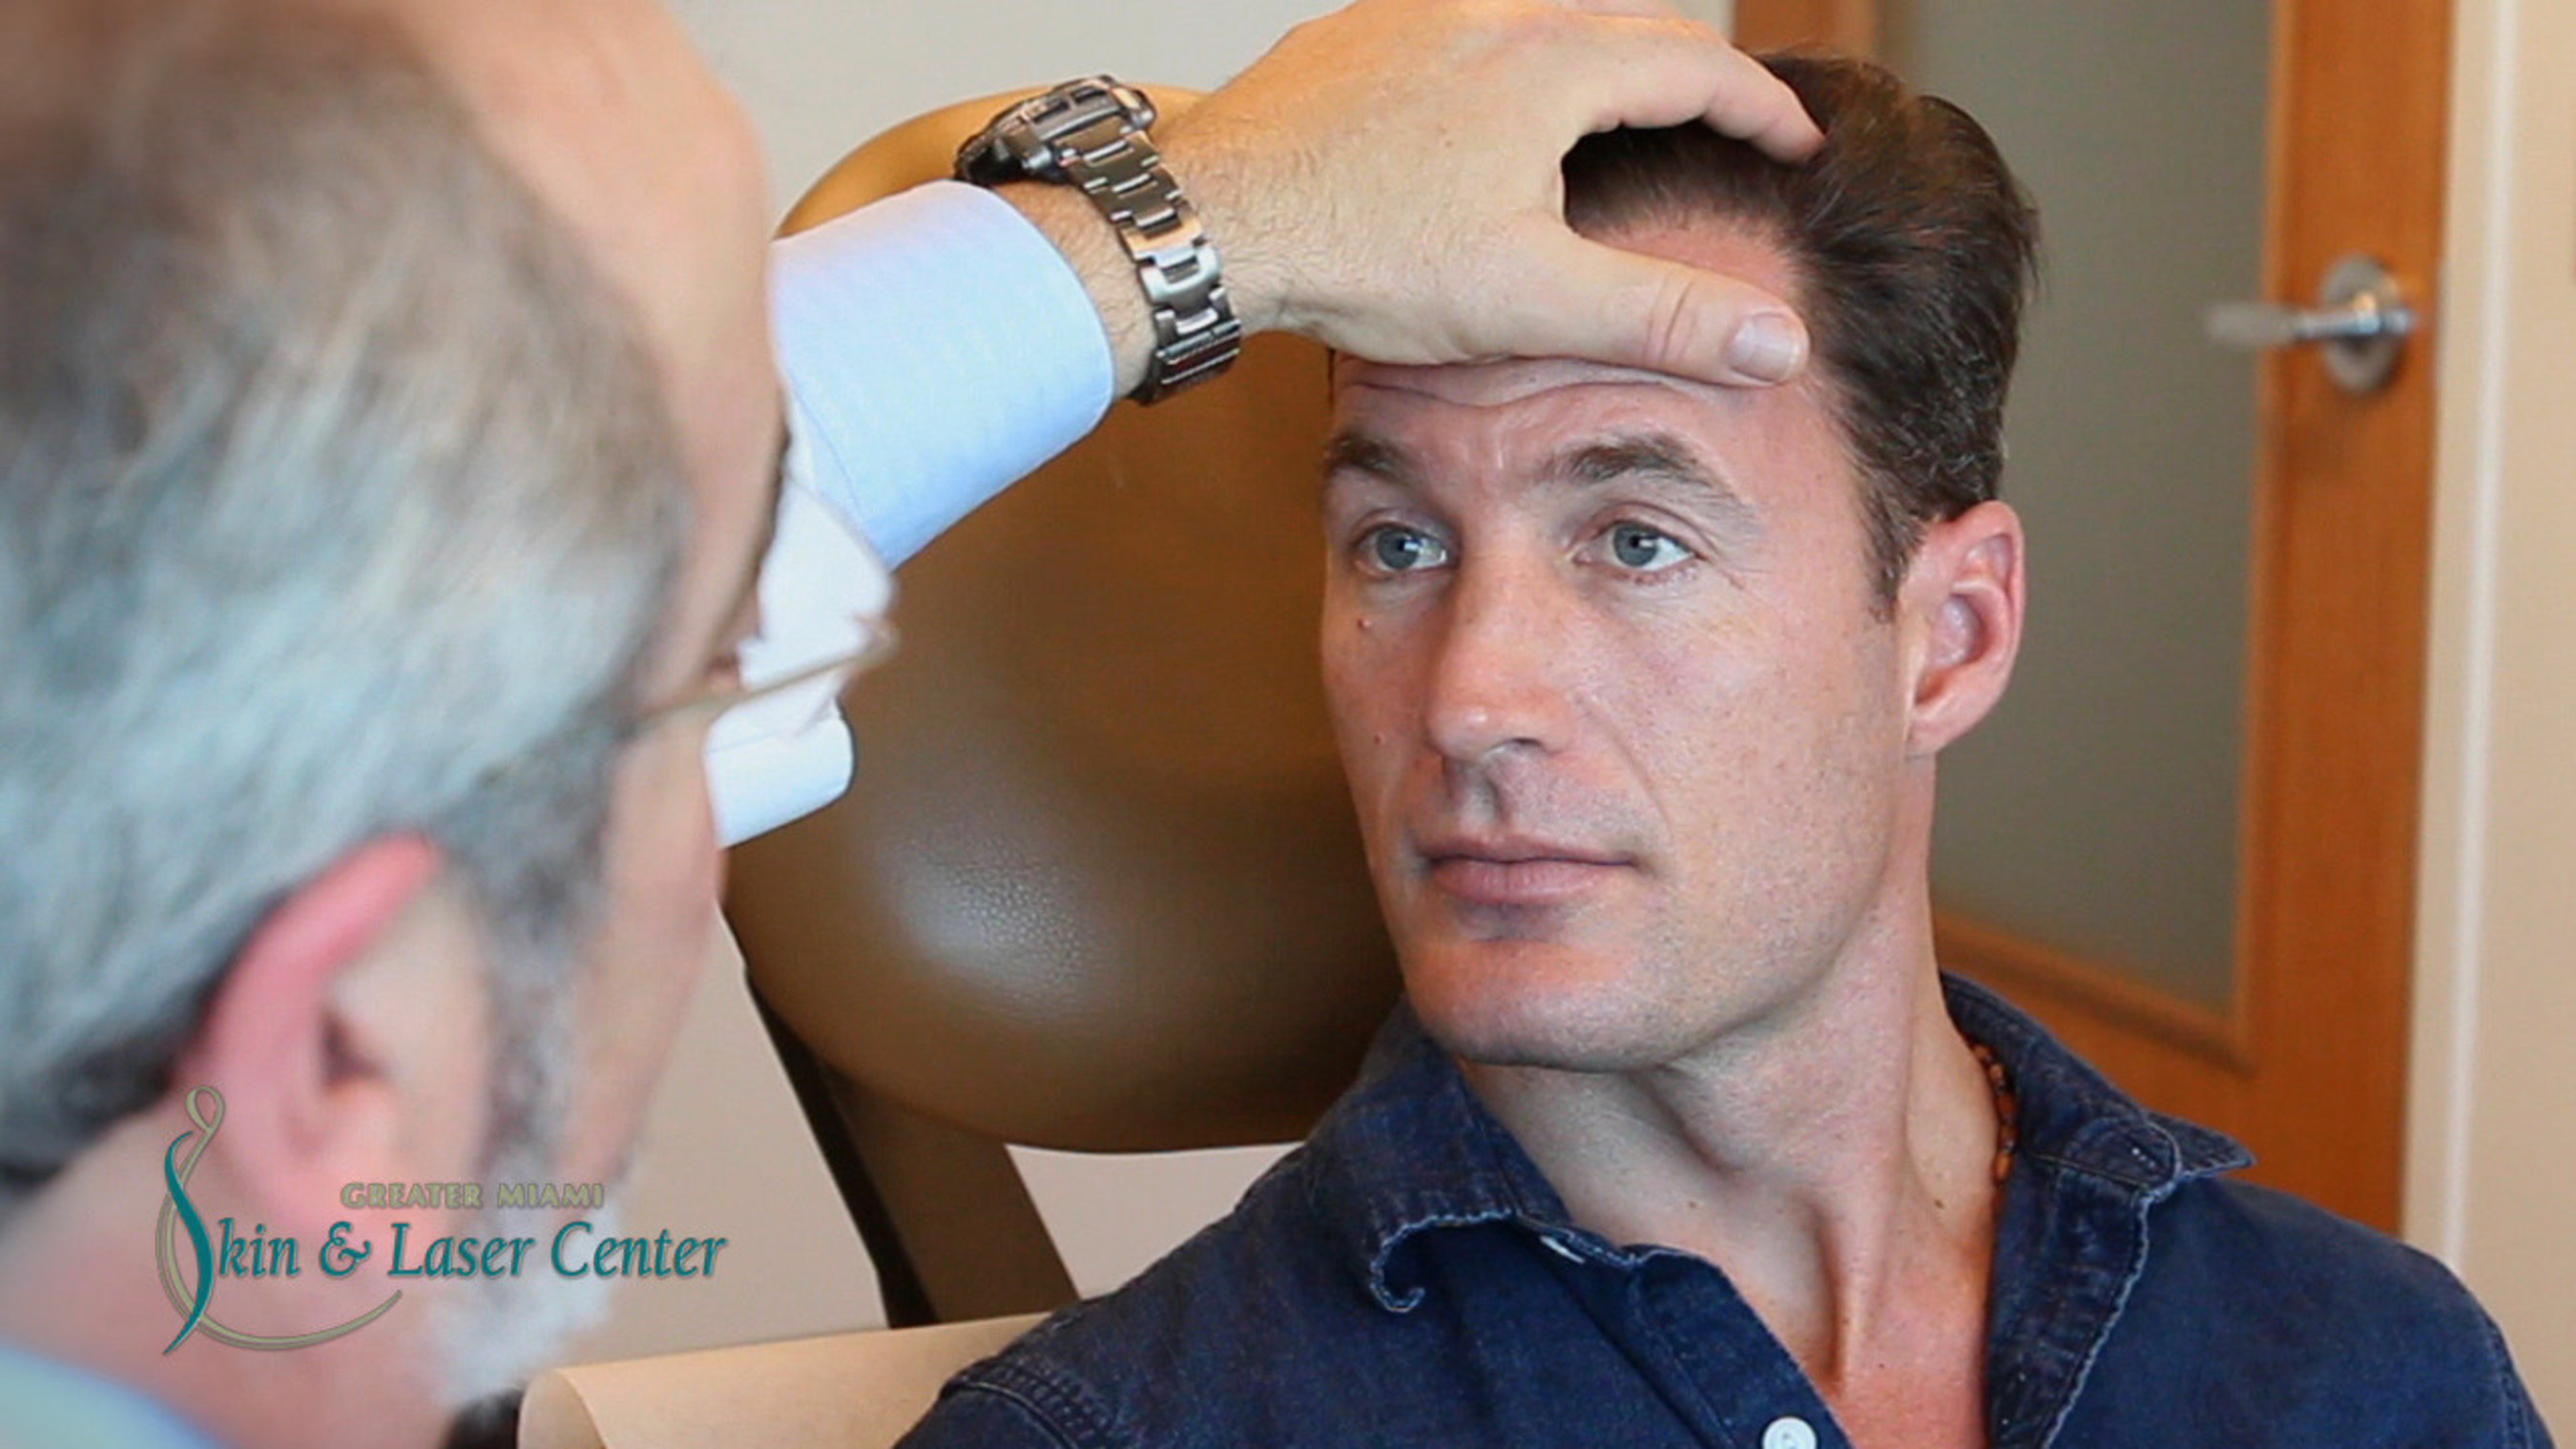 Greater Miami Skin And Laser Center Completes Wellness Exams for Men